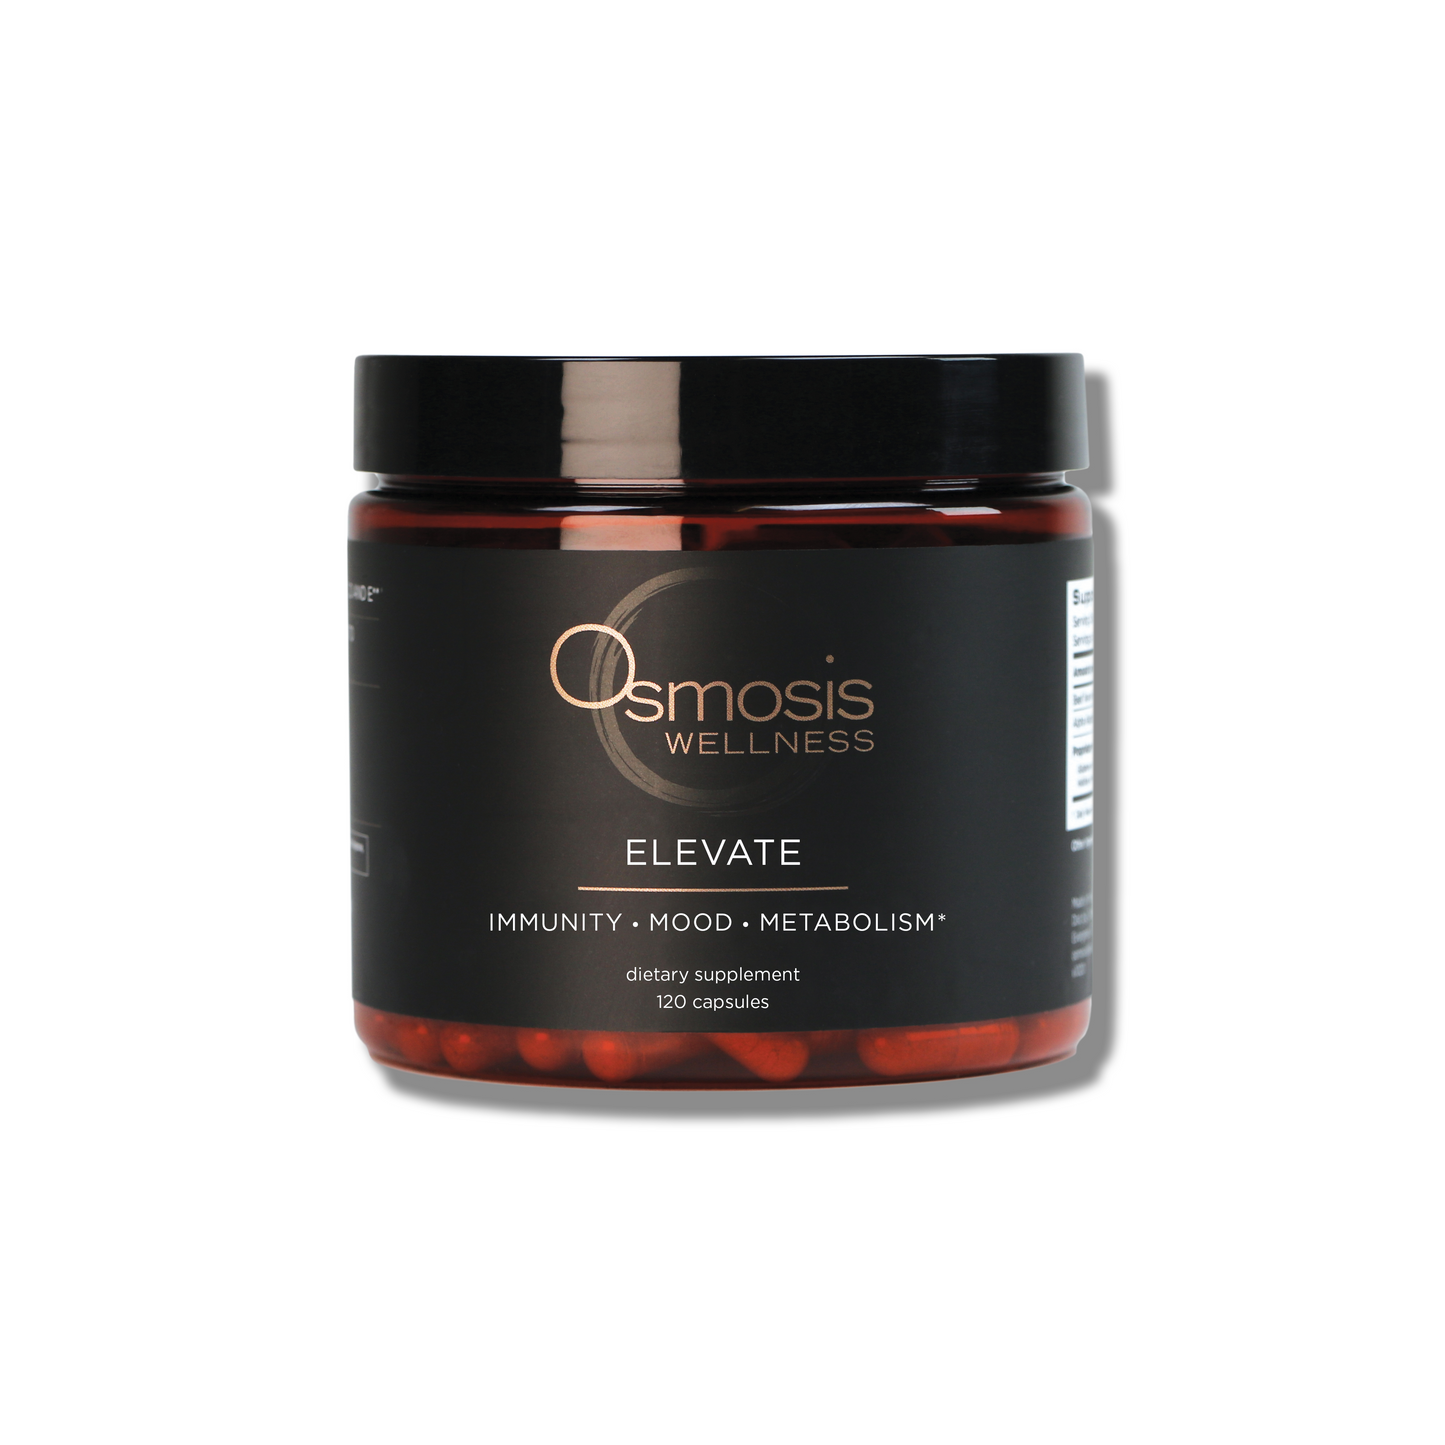 Elevate by Osmosis Beauty